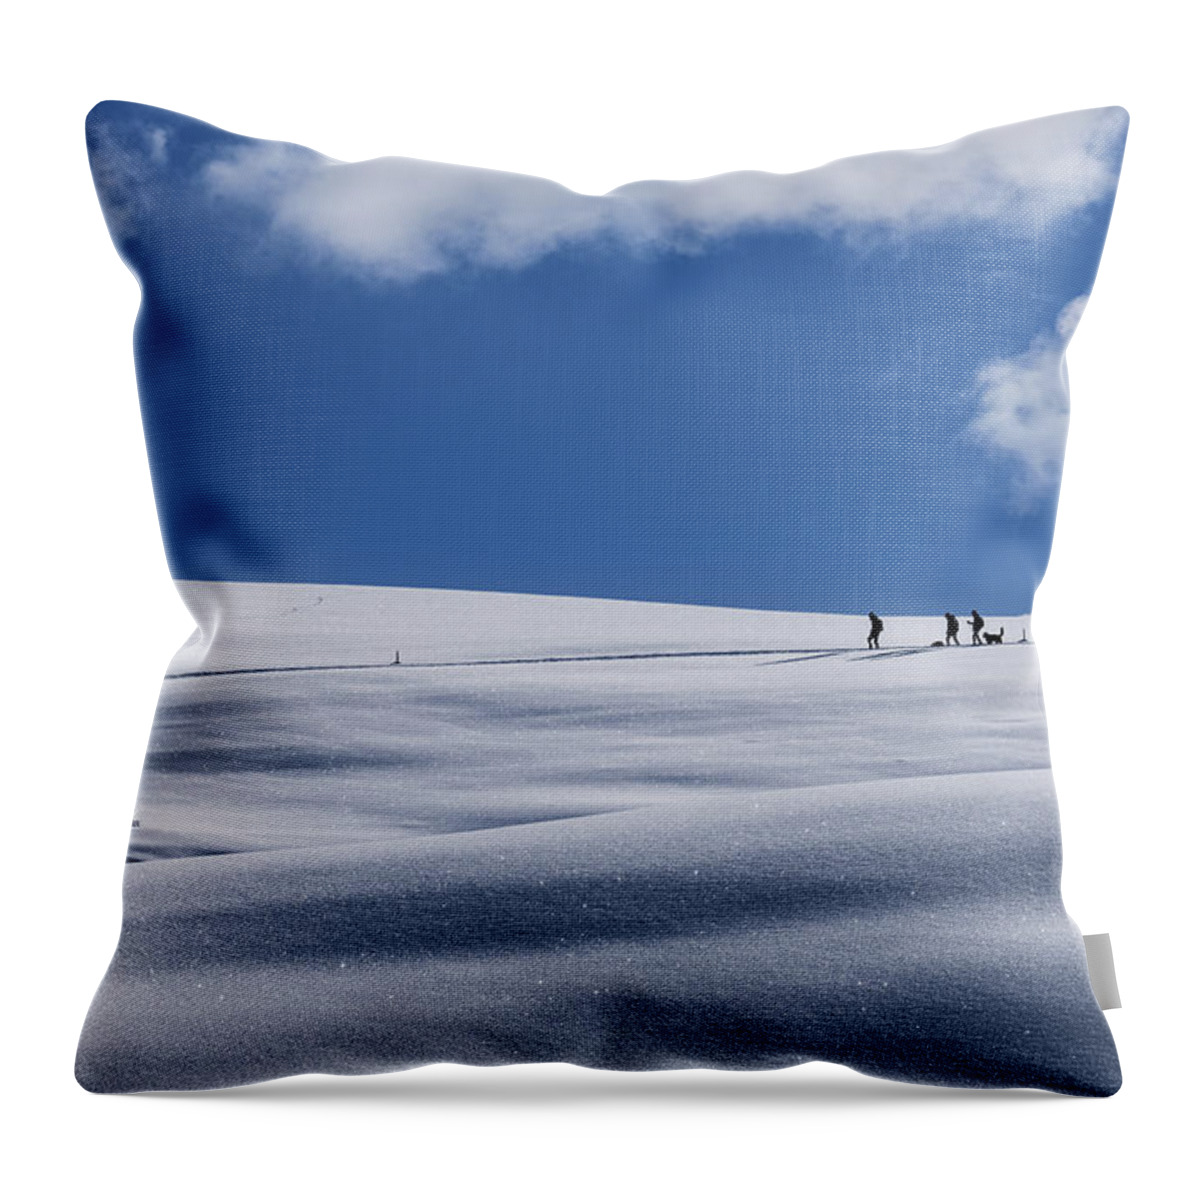 Italy Throw Pillow featuring the photograph Hikers On Snow by Alberto Zanoni